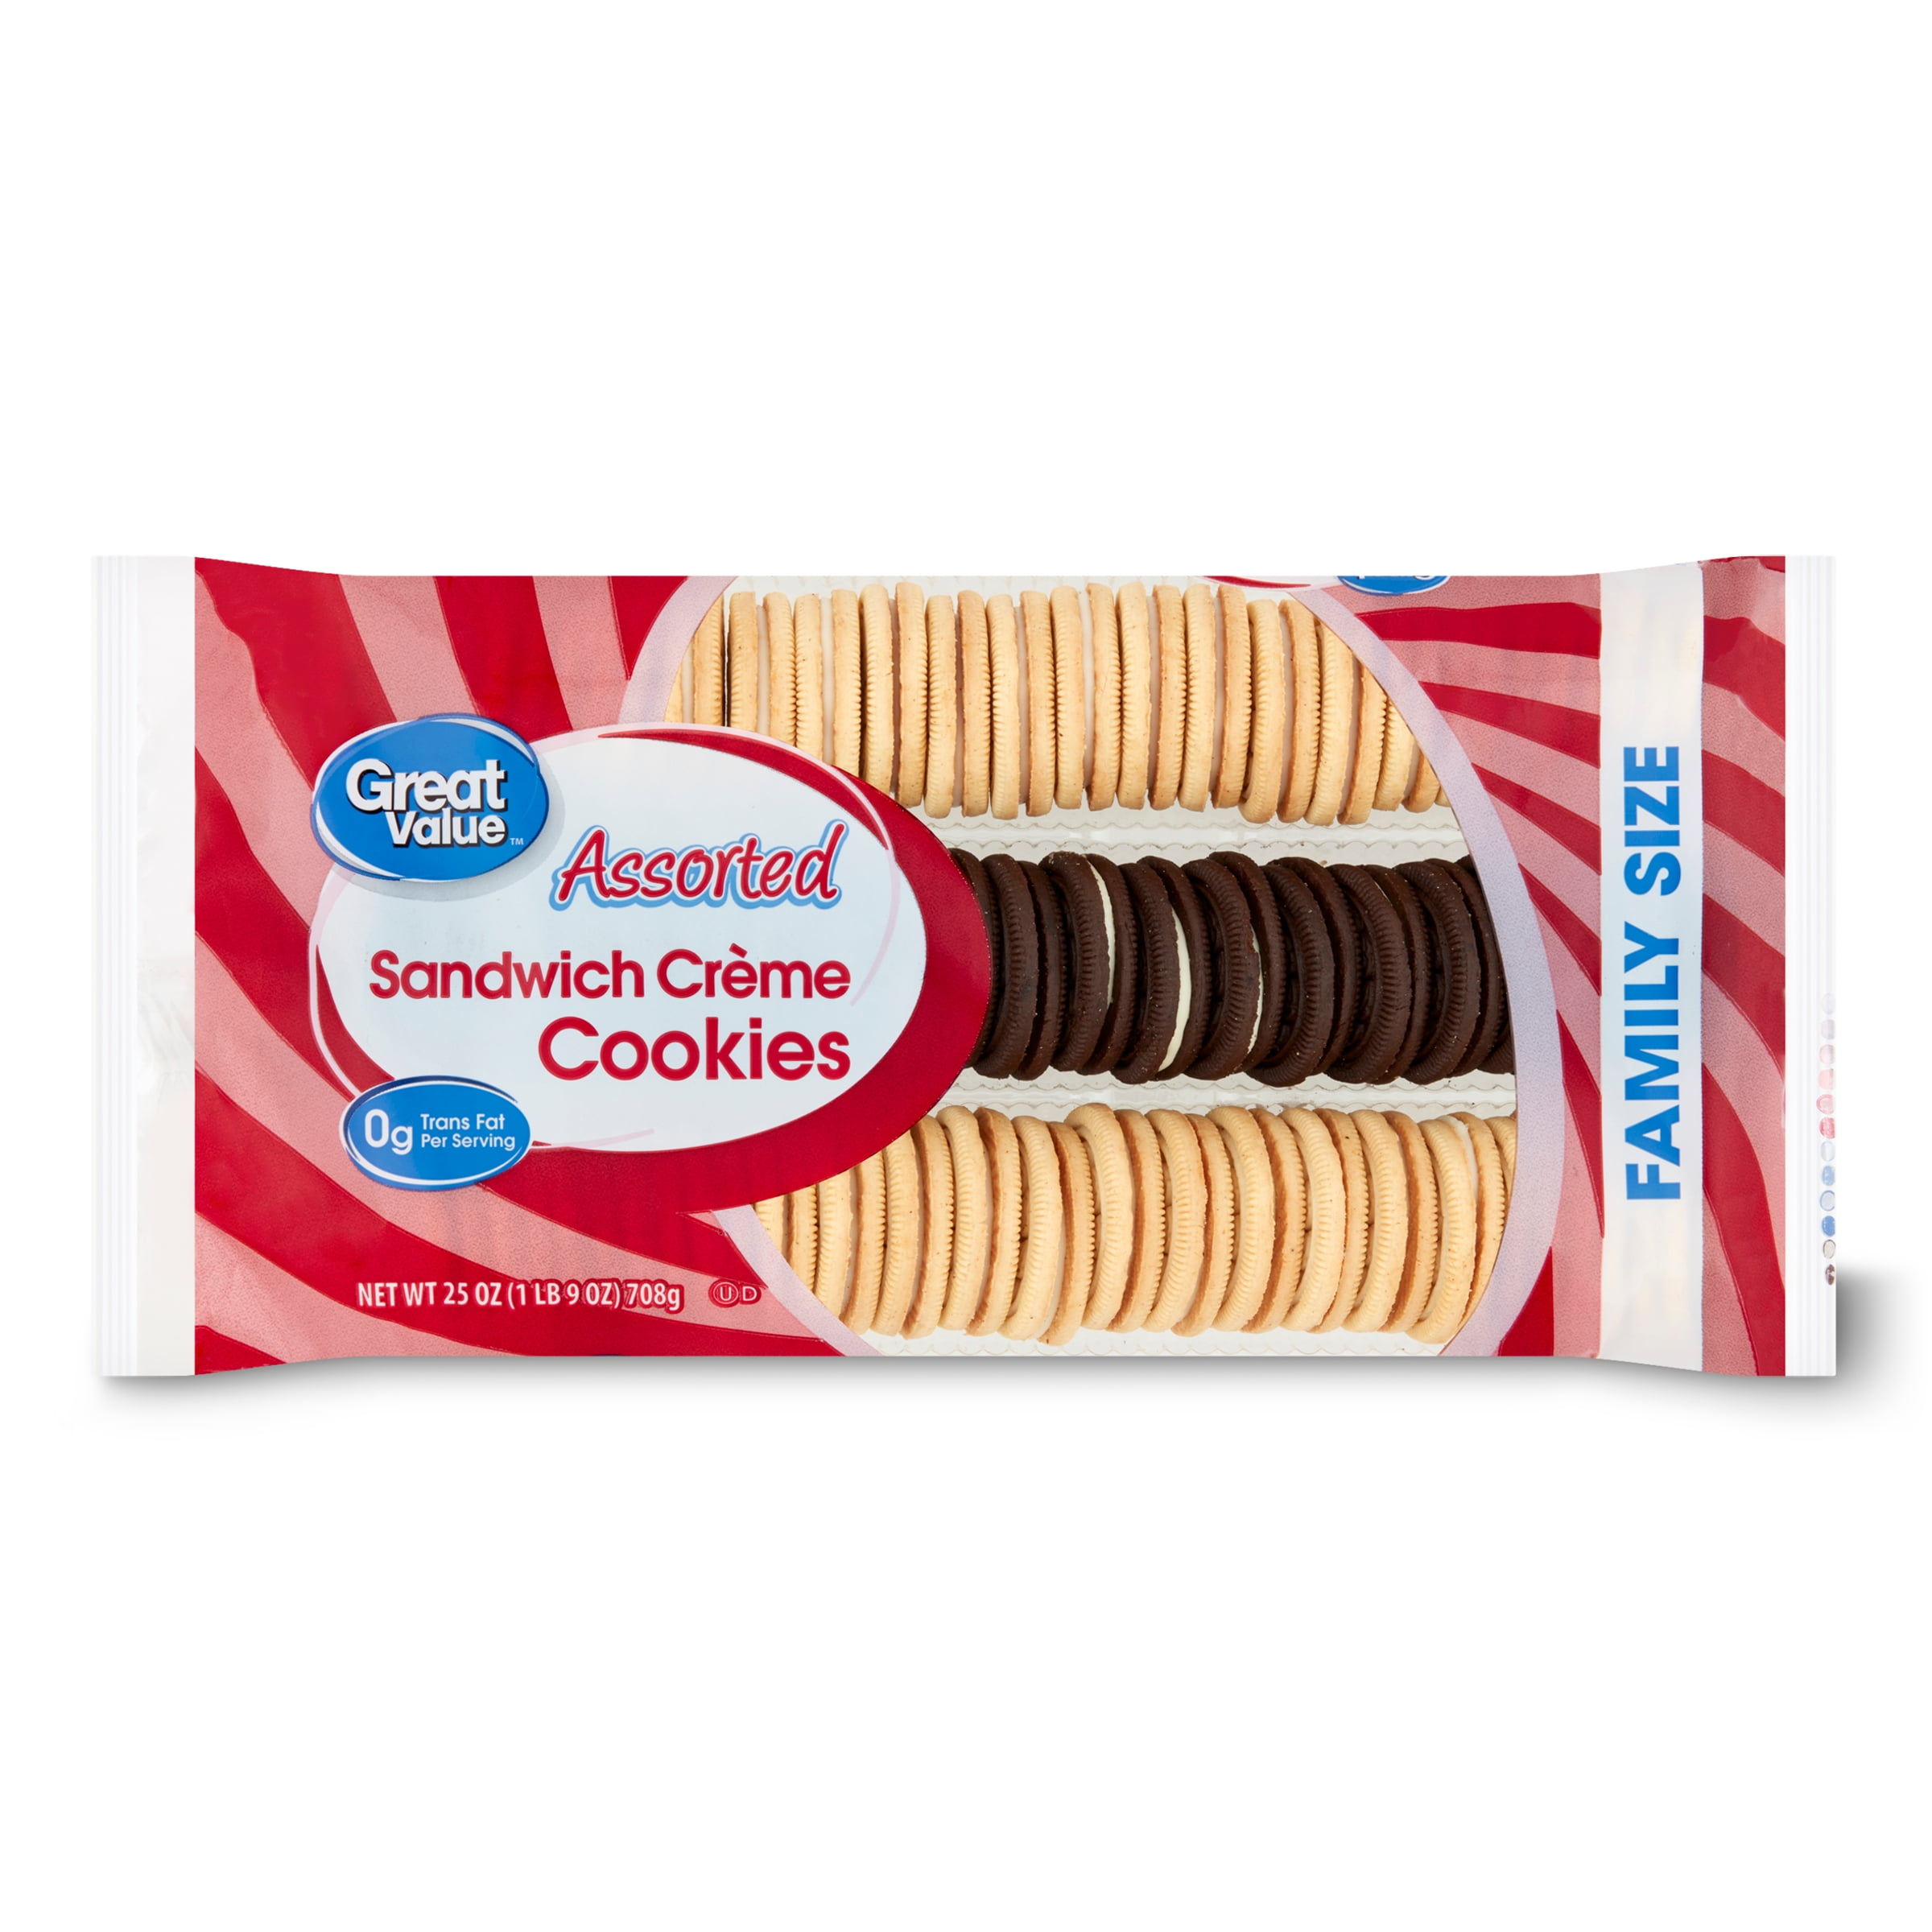 Great Value Assorted Sandwich Crme Cookies Family Size, 25 oz